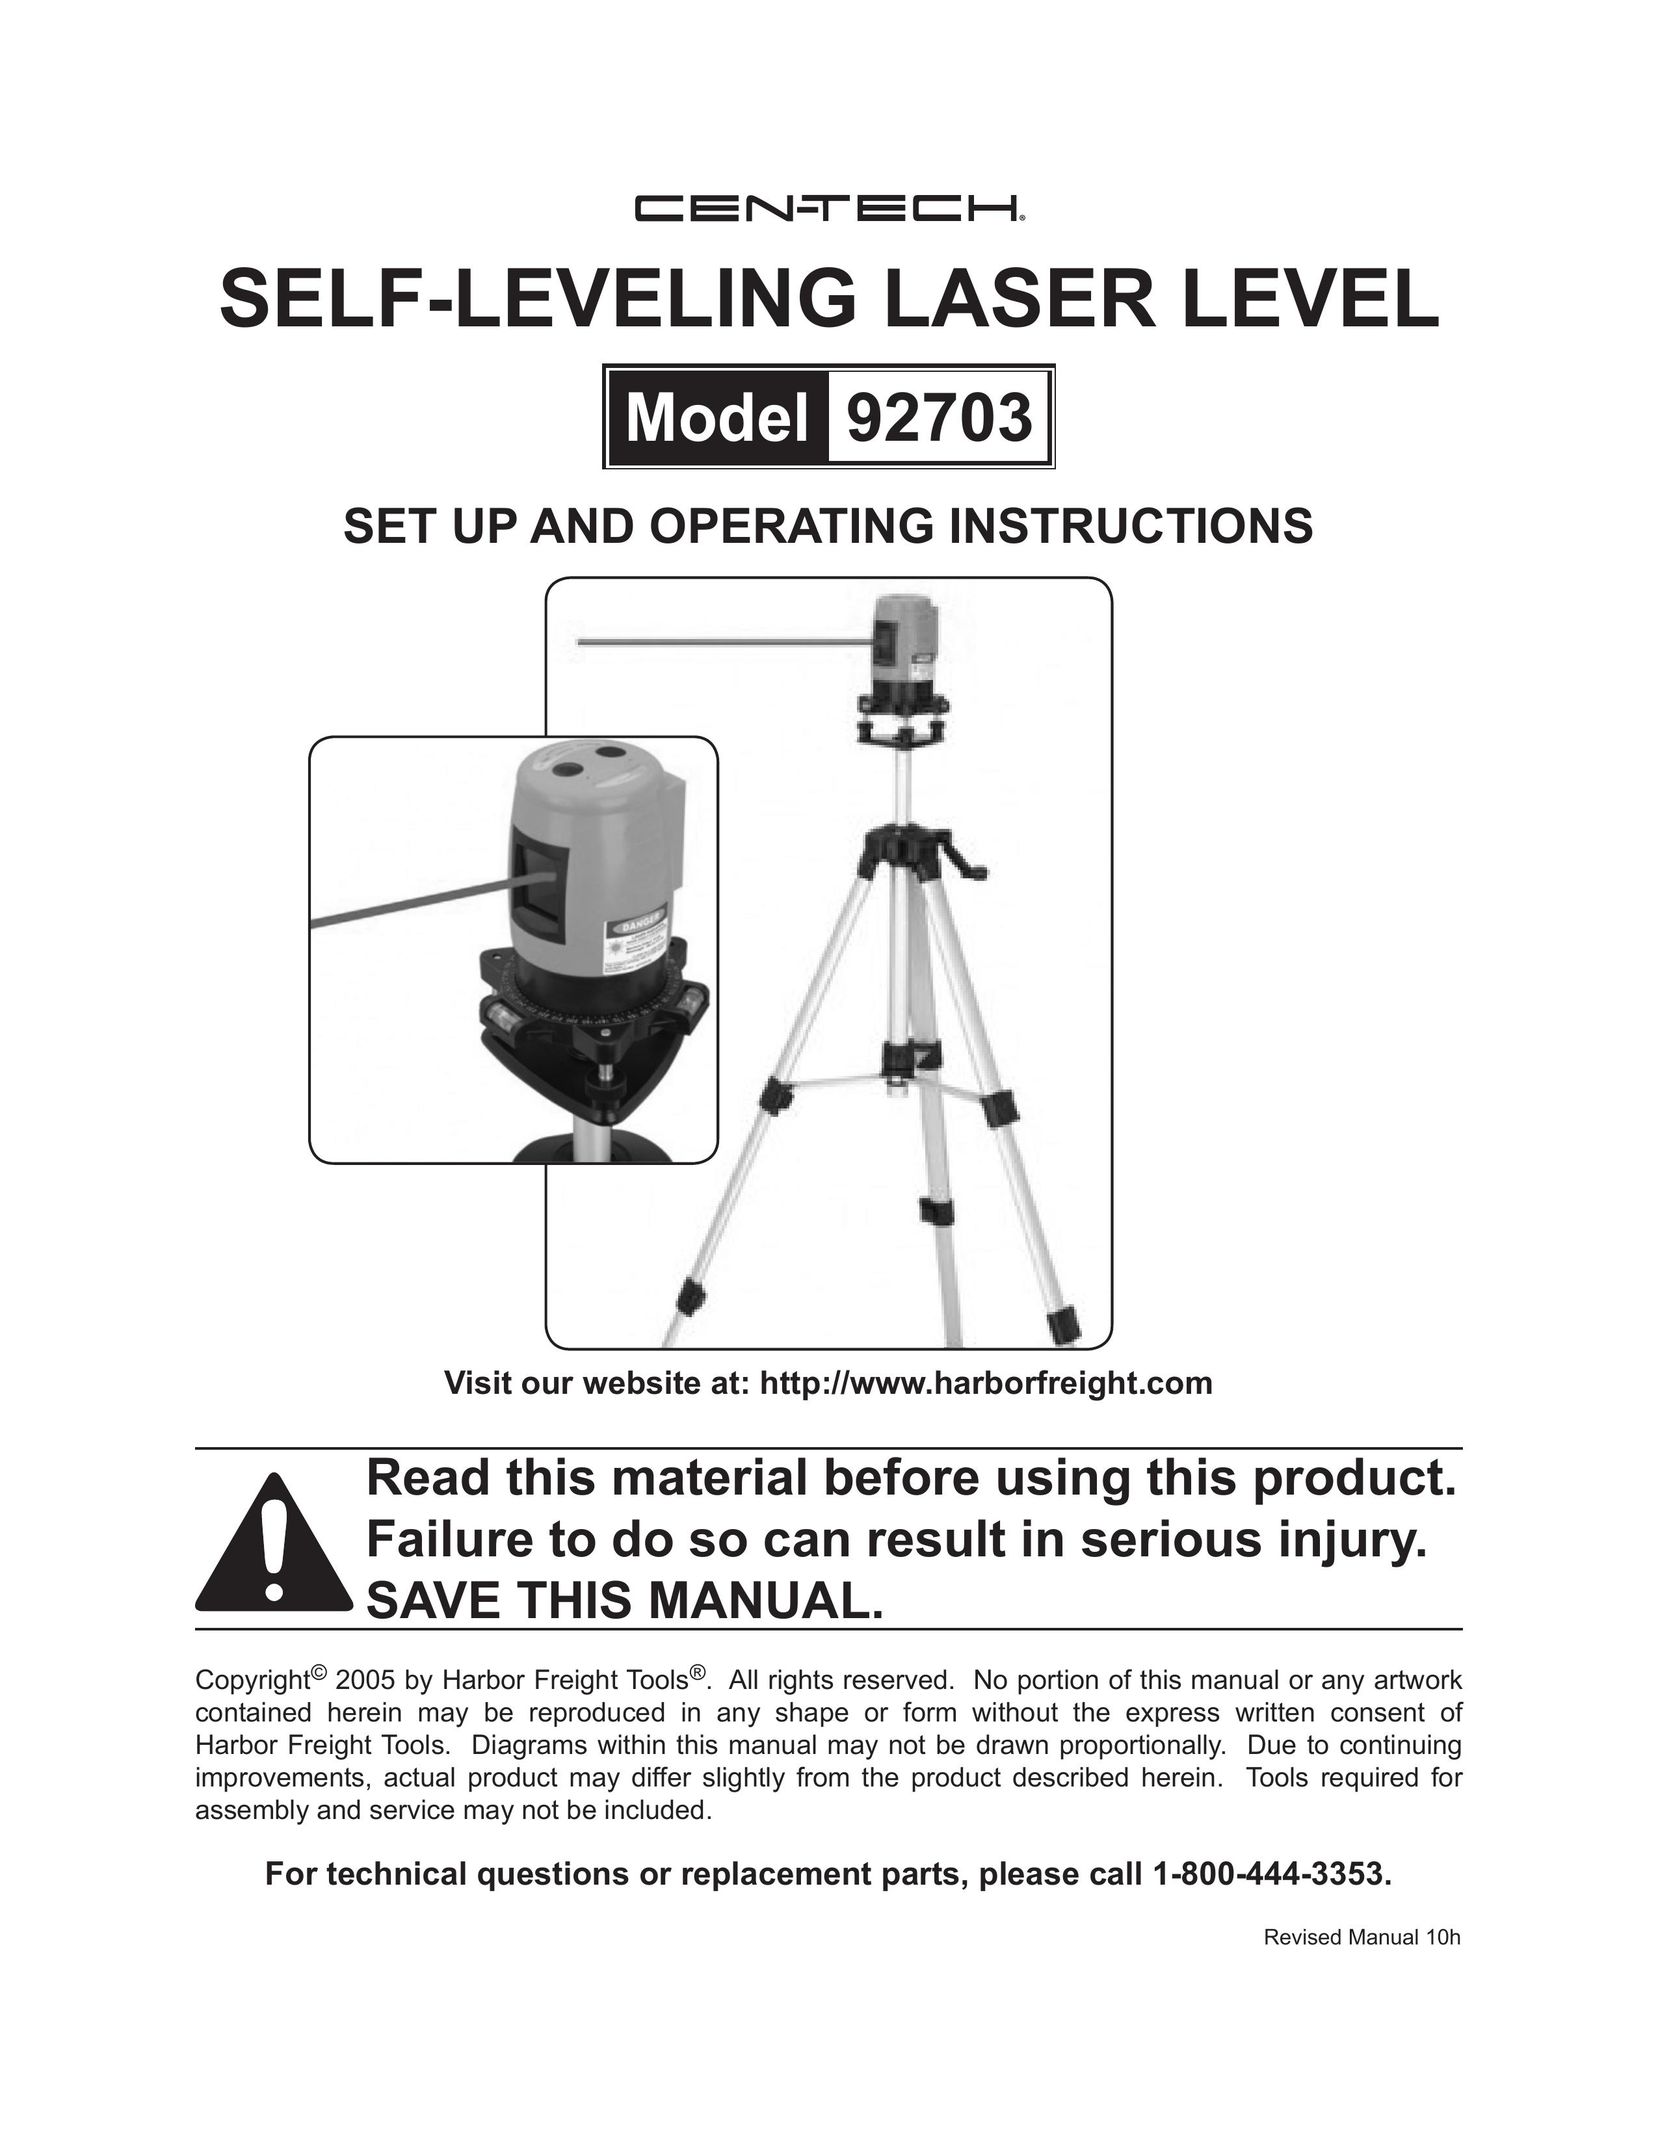 Harbor Freight Tools 92703 Laser Level User Manual